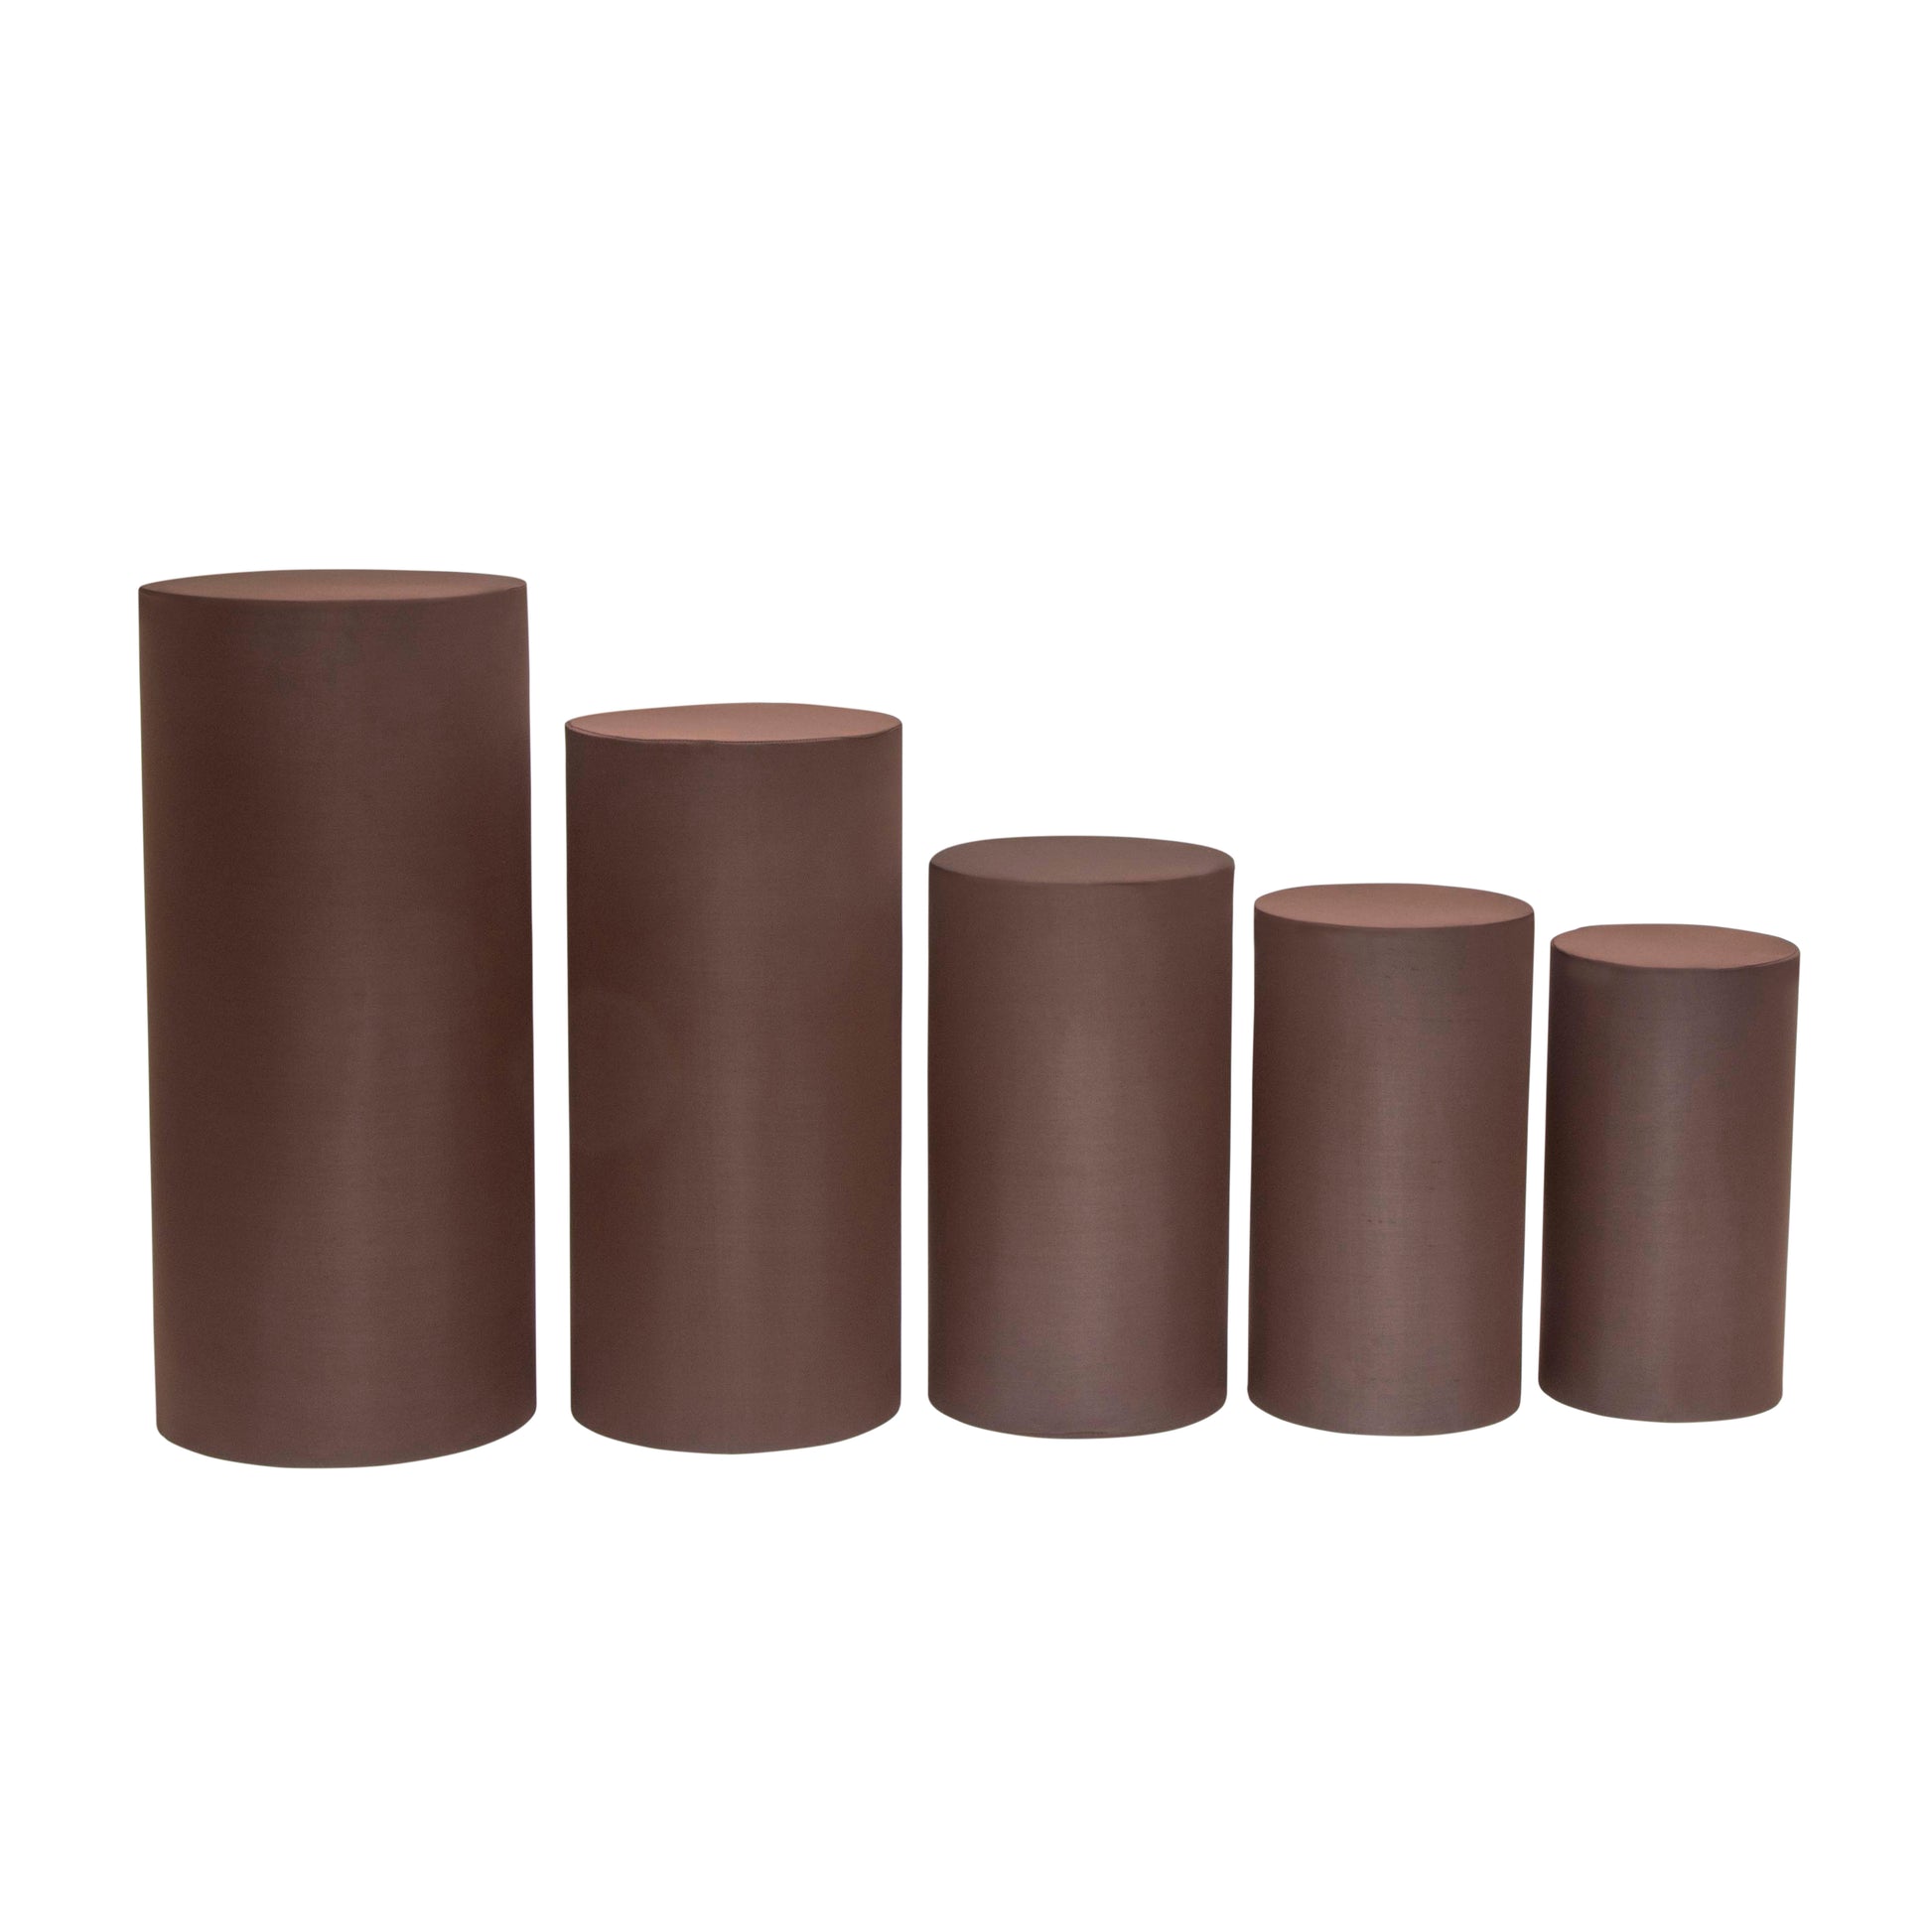 Spandex Pillar Covers for Metal Cylinder Pedestal Stands 5 pcs/set - Chocolate Brown